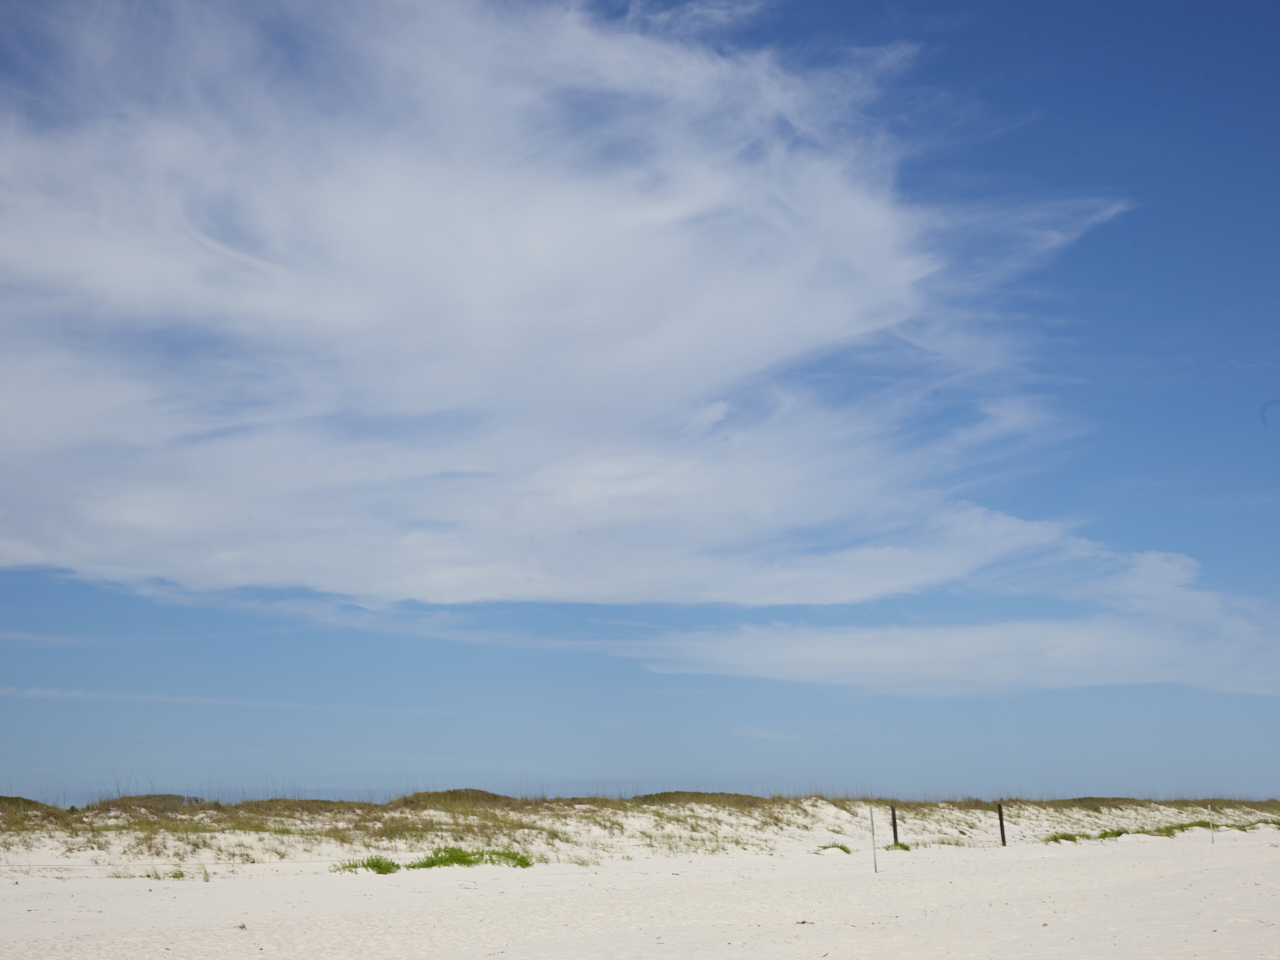 Landscape photo of a white beach stretching across the horizon, with blue skies and white clouds